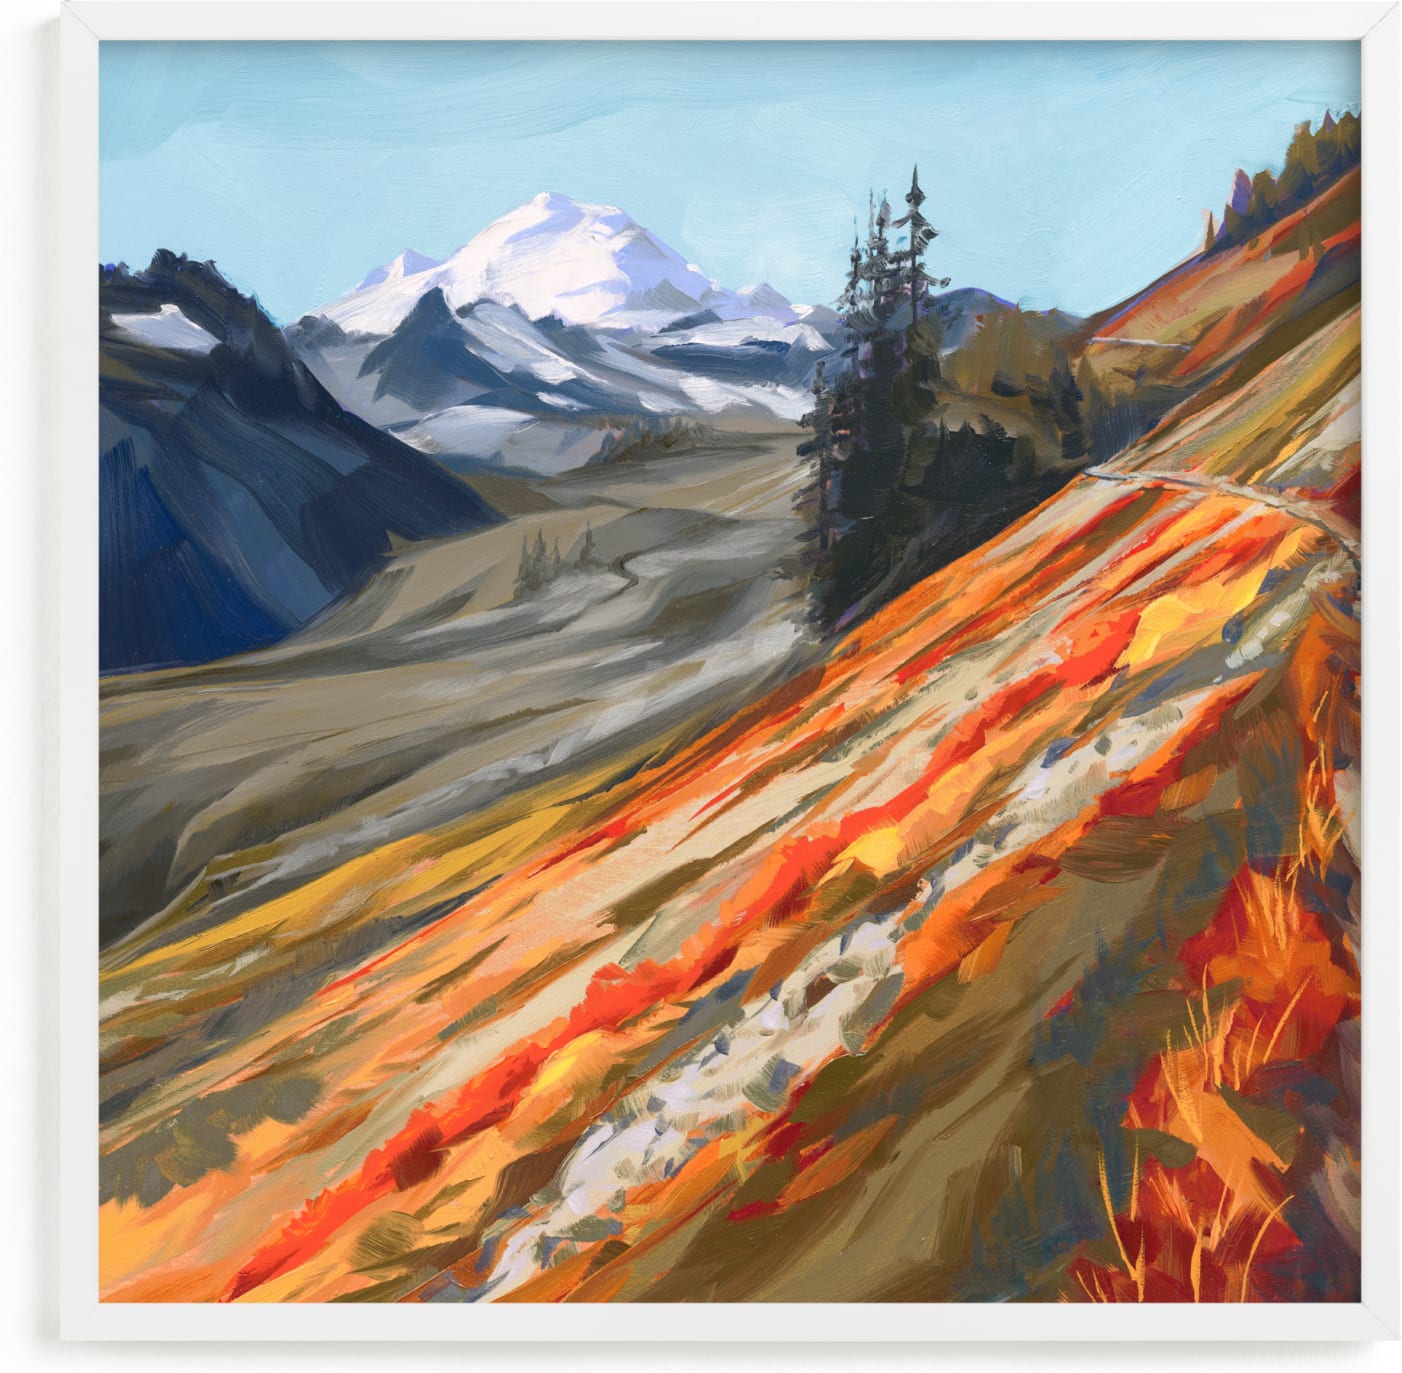 This is a colorful art by Khara Ledonne called Mount Baker in Autumn.